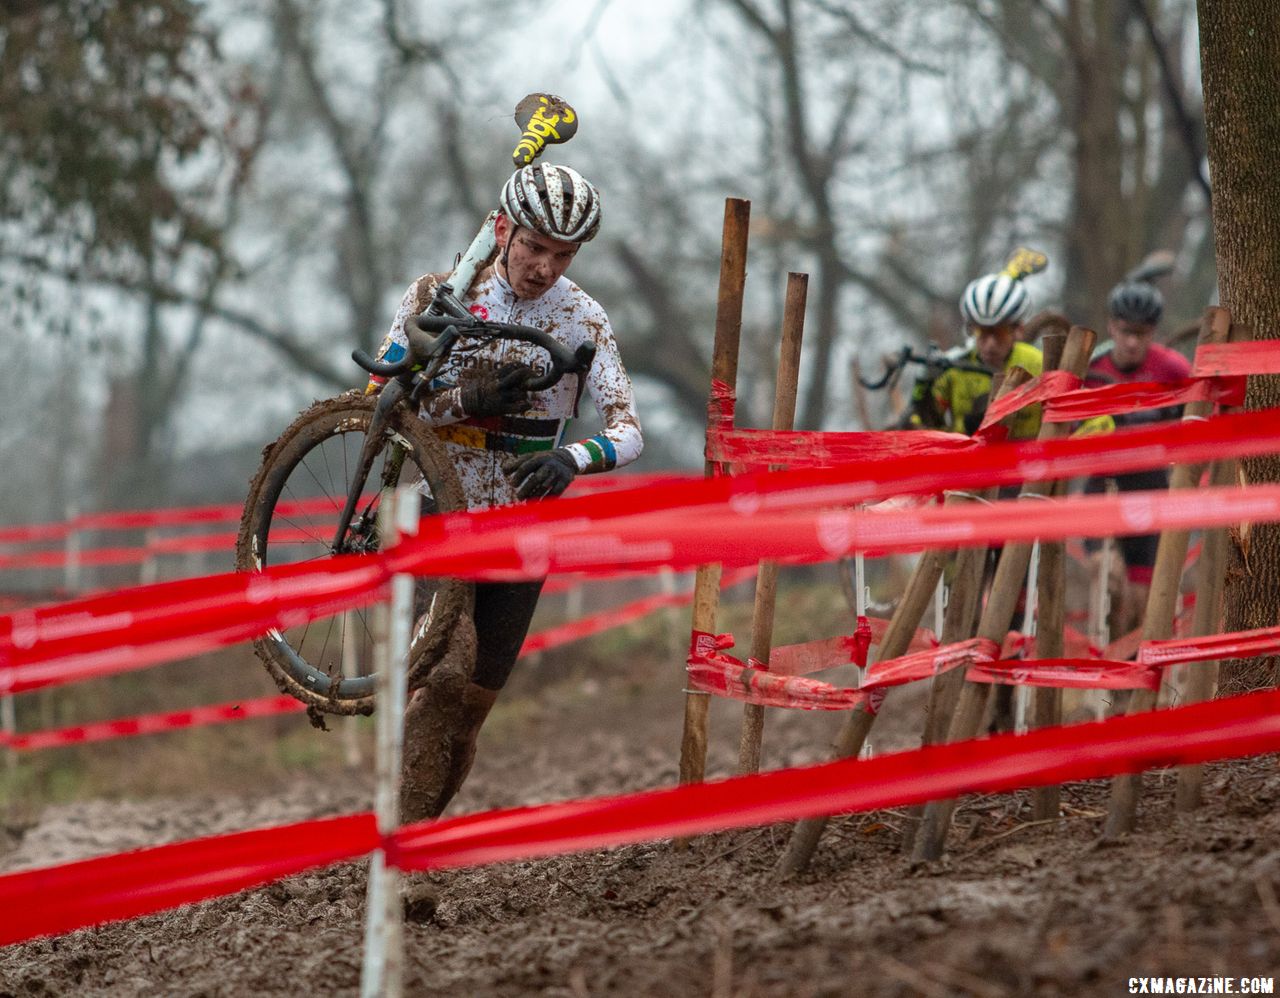 Sheffield leads Morton, Carter on lap two. Junior Men 17-18. 2018 Cyclocross National Championships, Louisville, KY. © A. Yee / Cyclocross Magazine